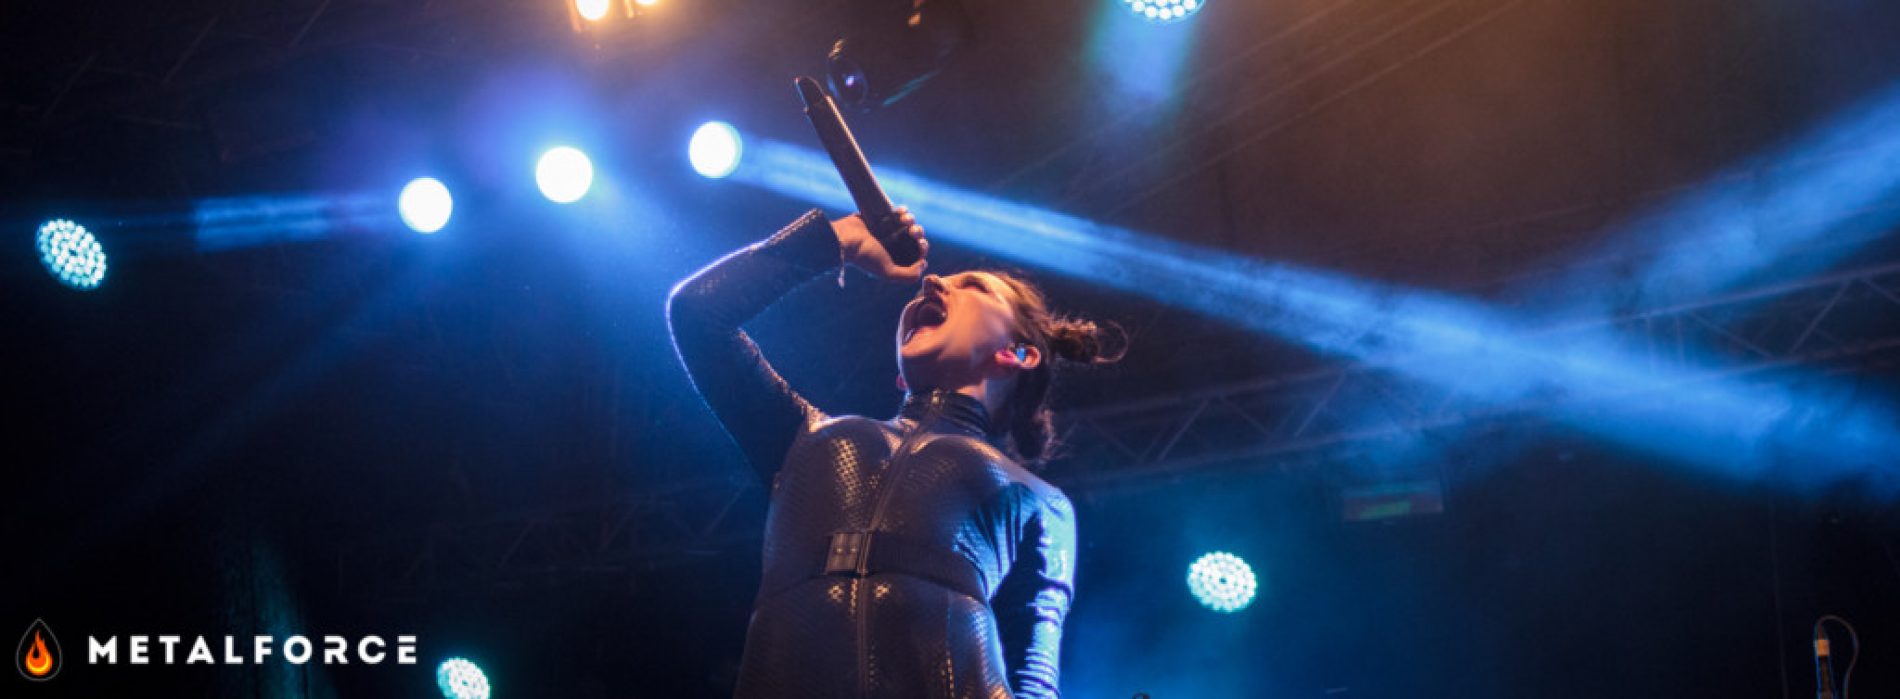 Galerie foto concert Arch Enemy si Jinjer in Quantic